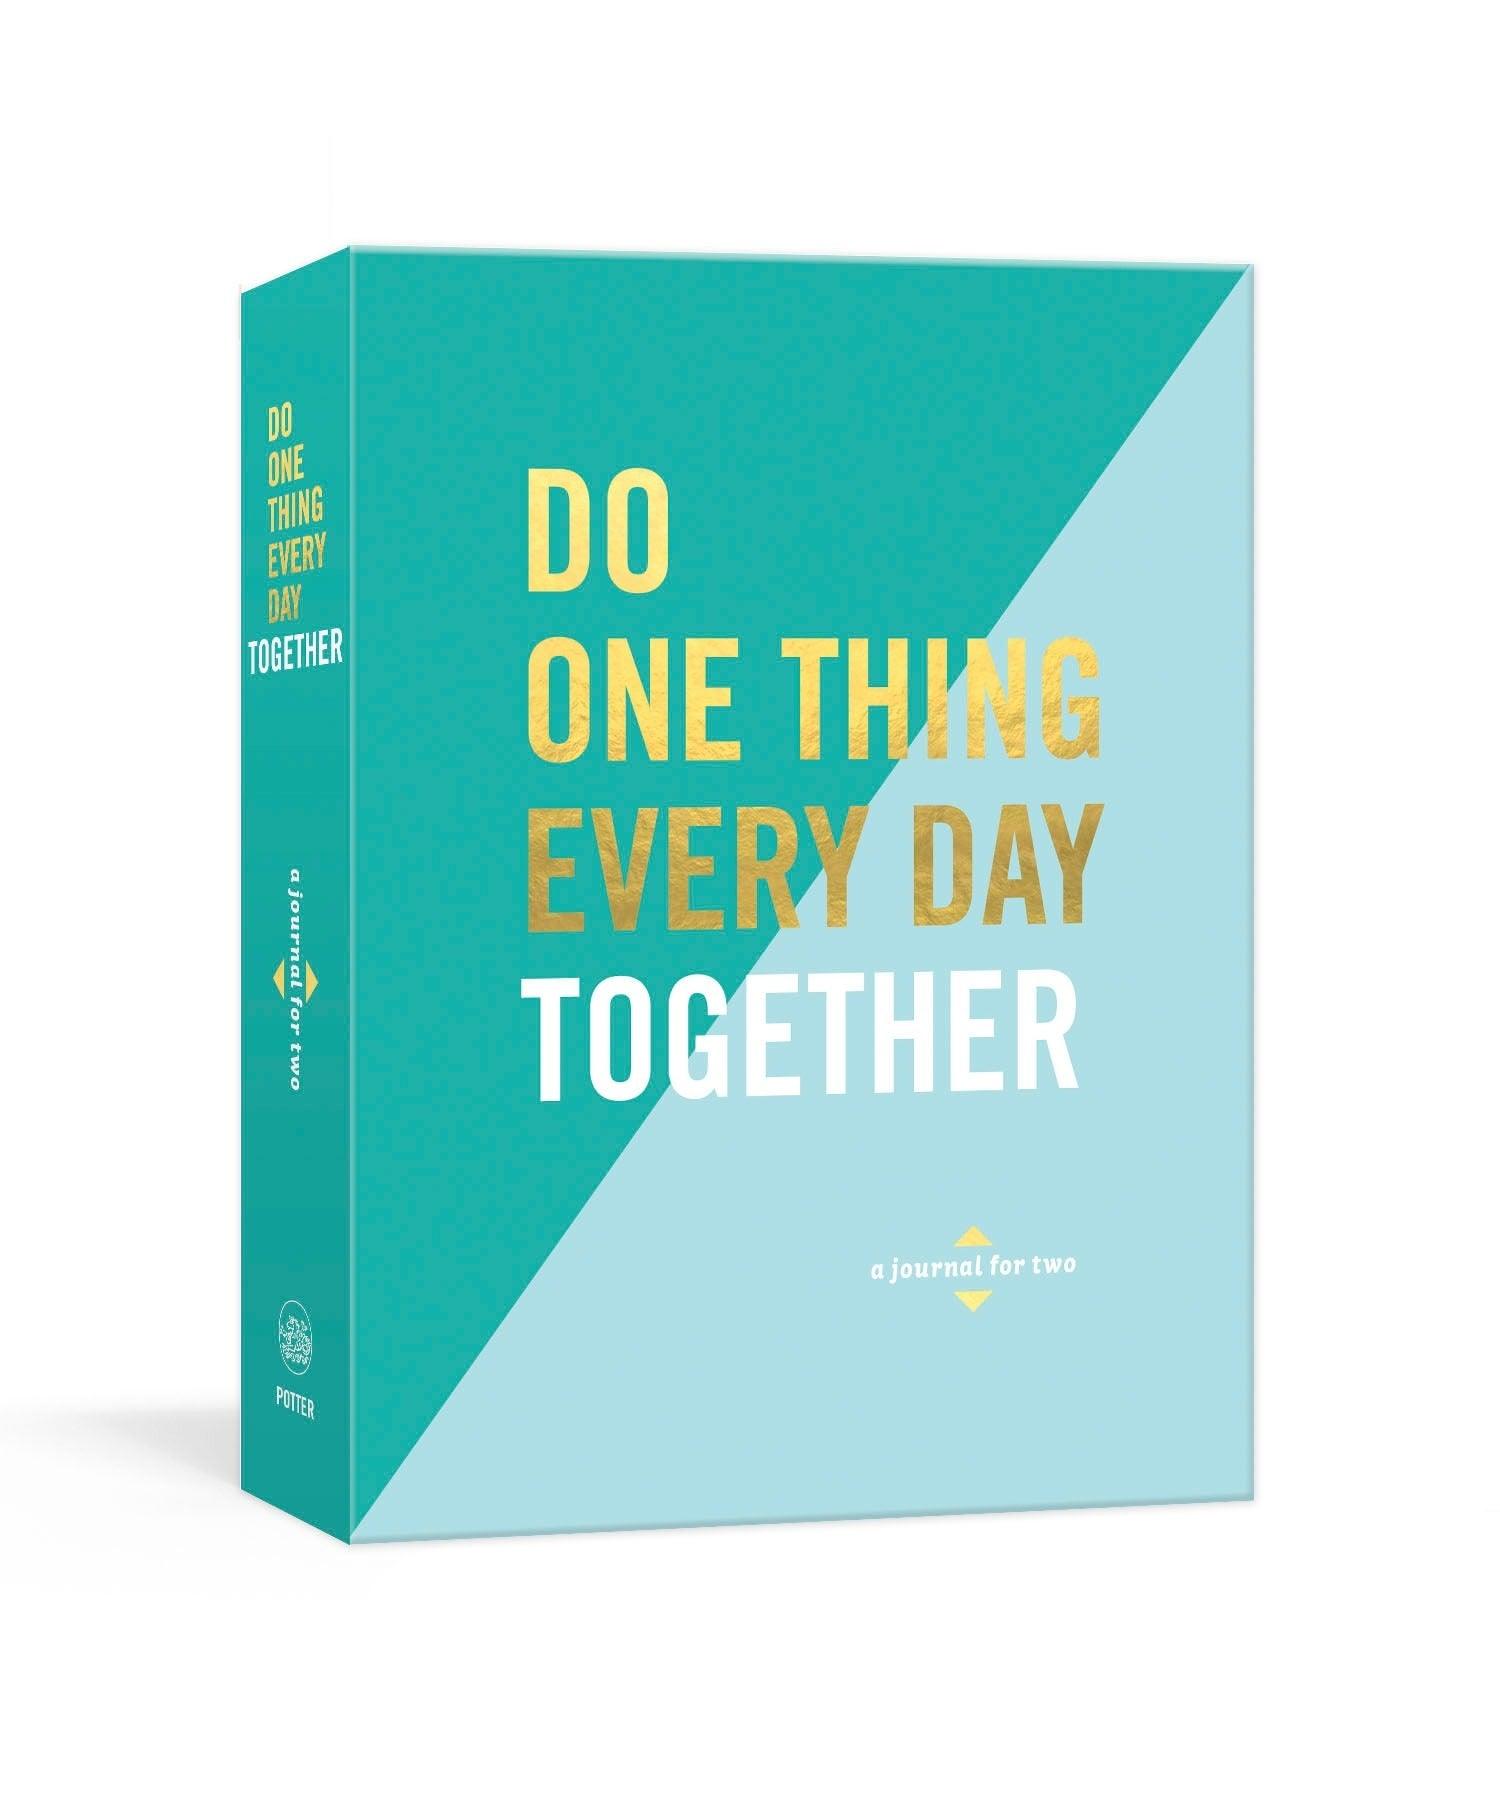 Do One Thing Every Day Together by Robie Rogge, Dian Smith at BIBLIONEPAL Bookstore